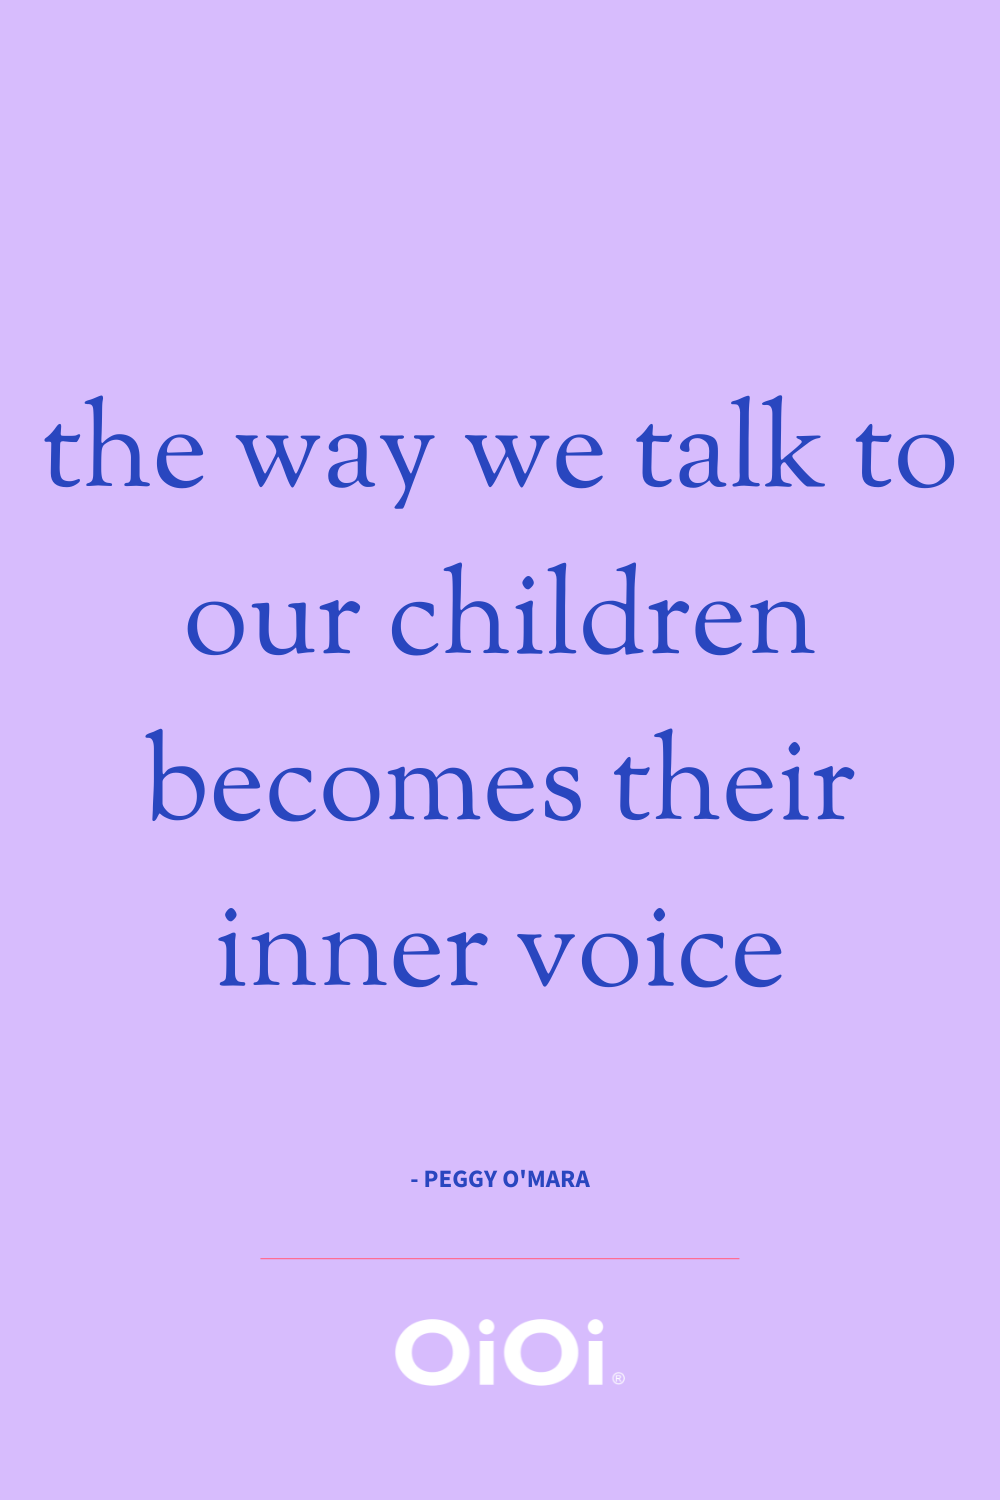 quote: the way we talk to our children becomes their inner voice